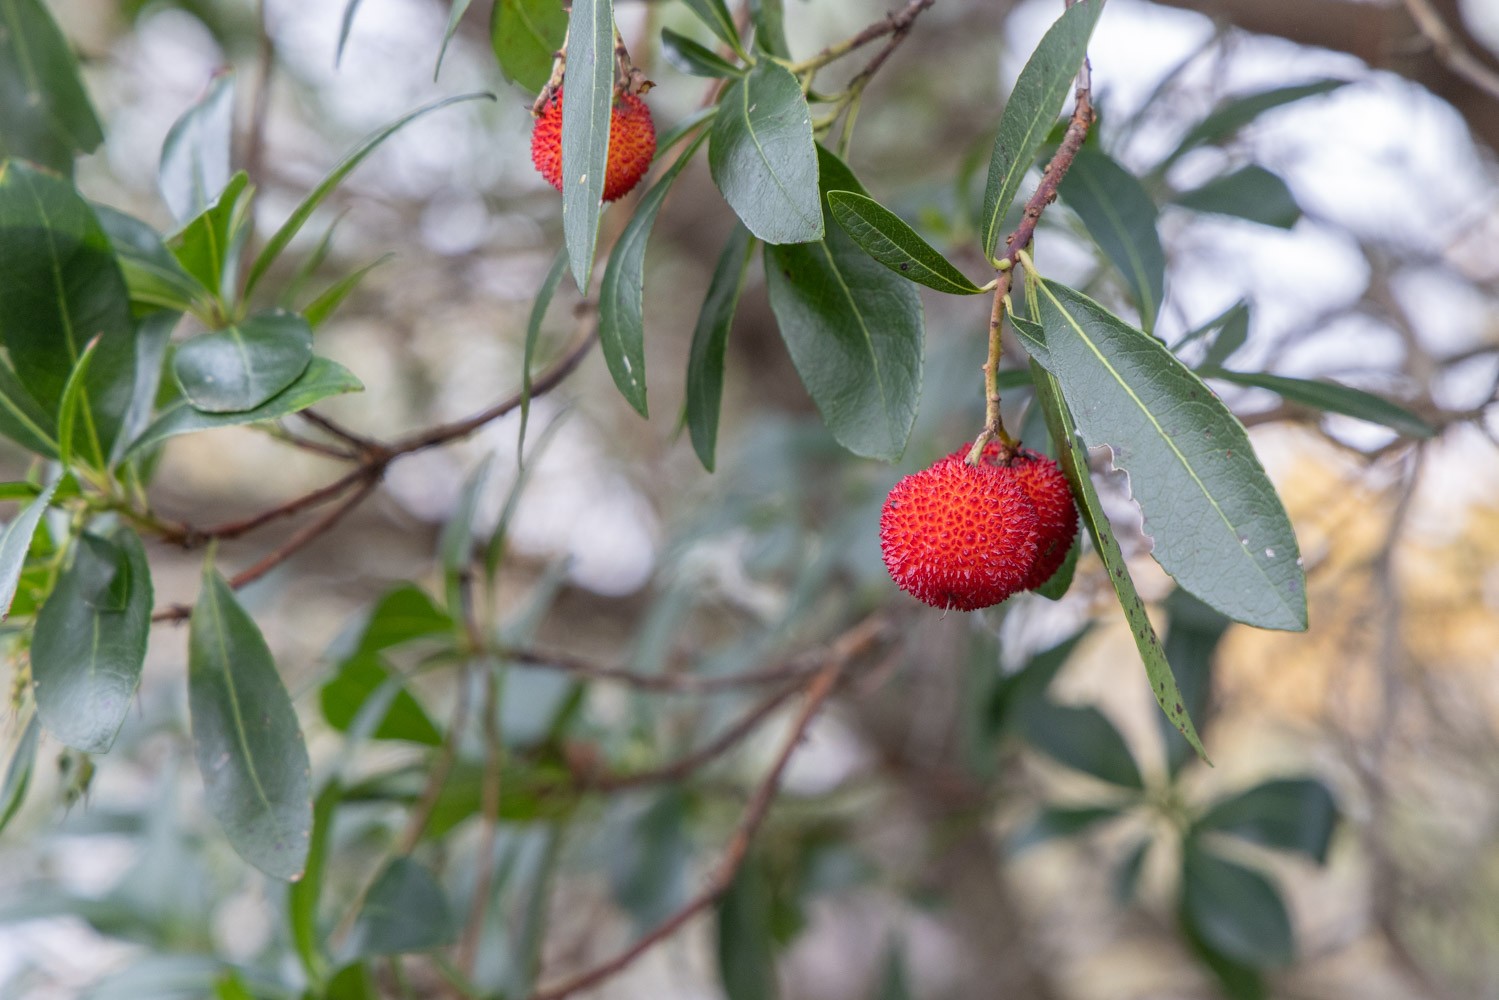 Strawberry from a strawberry tree